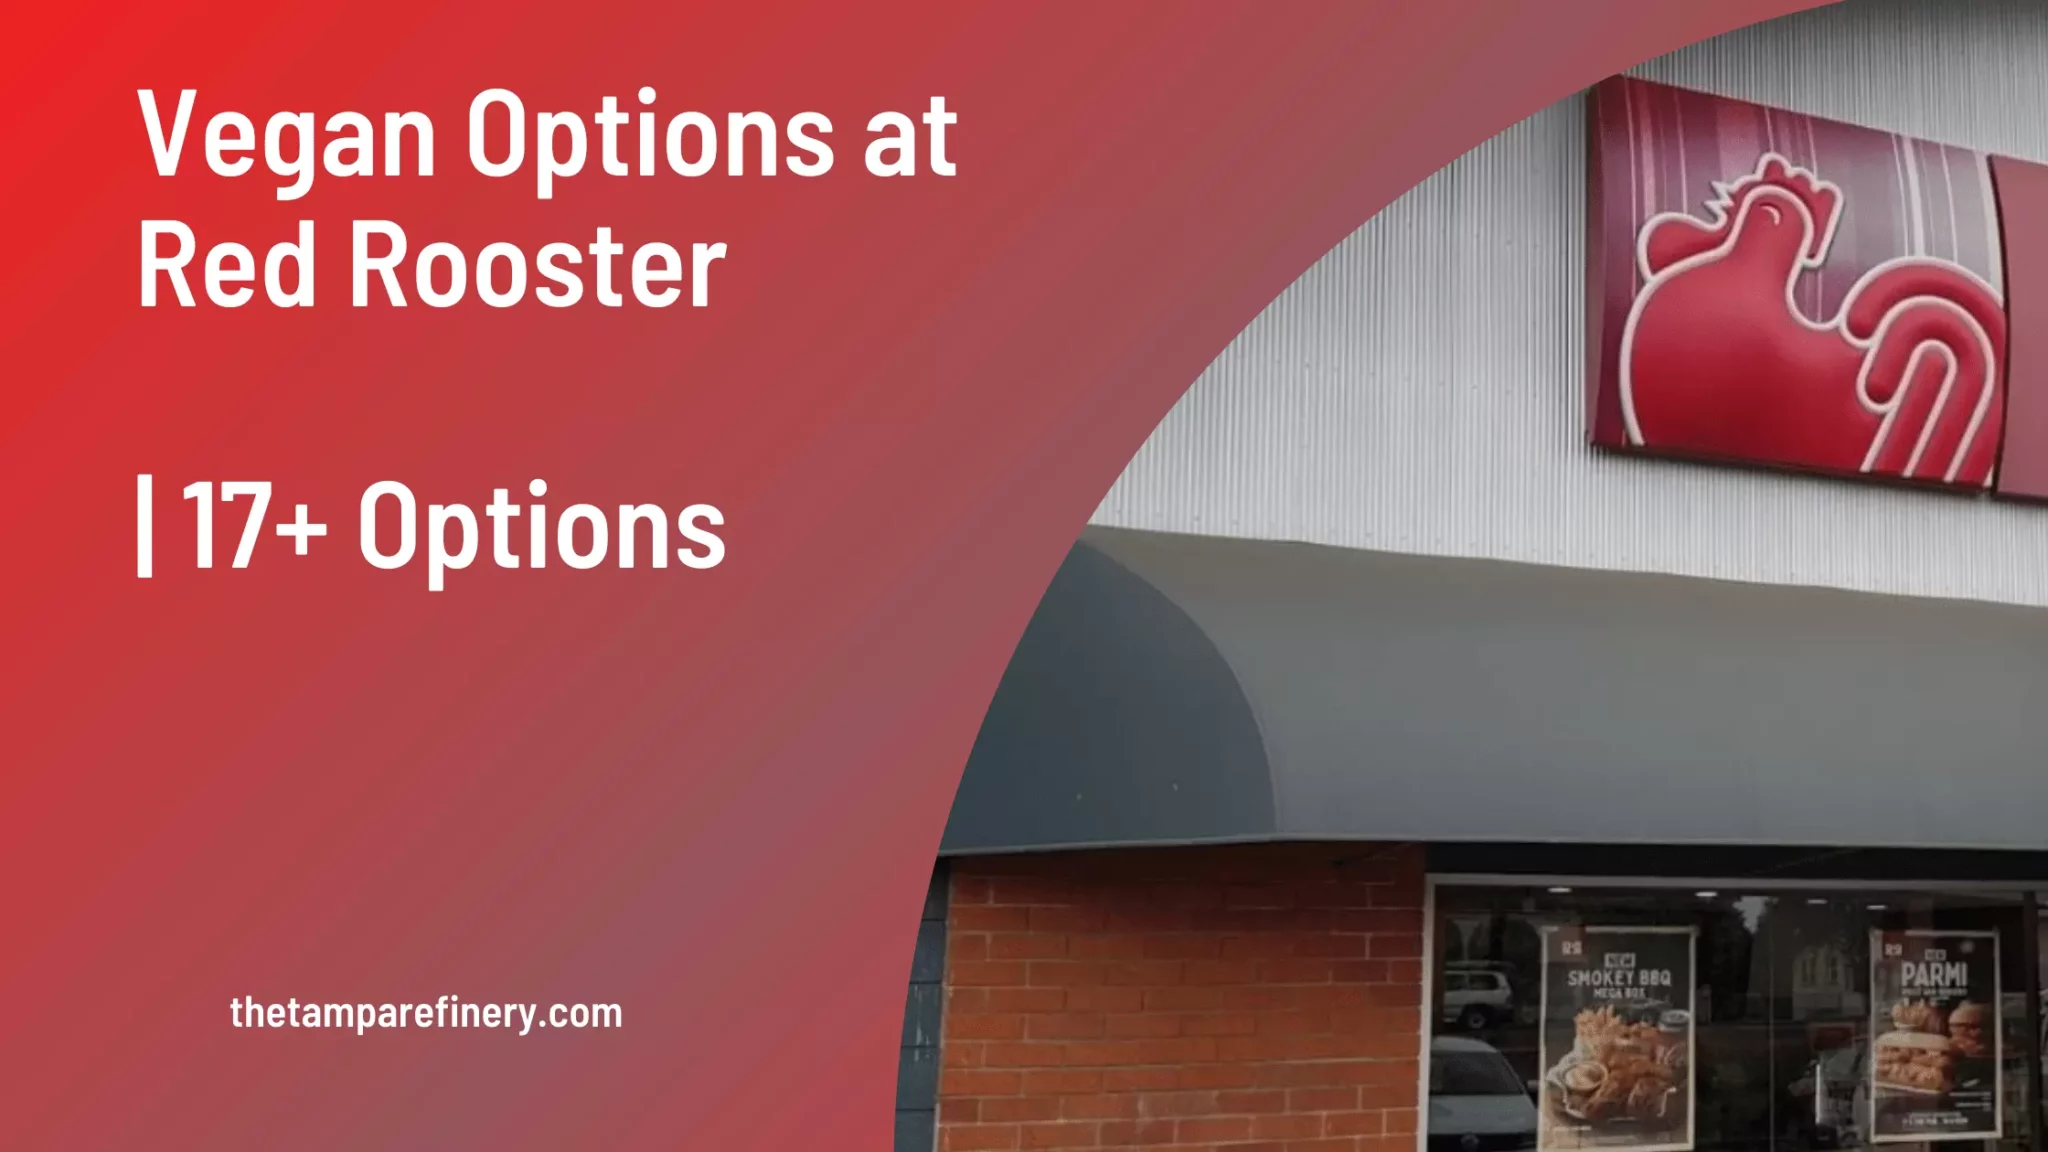 Vegan Options at Red Rooster